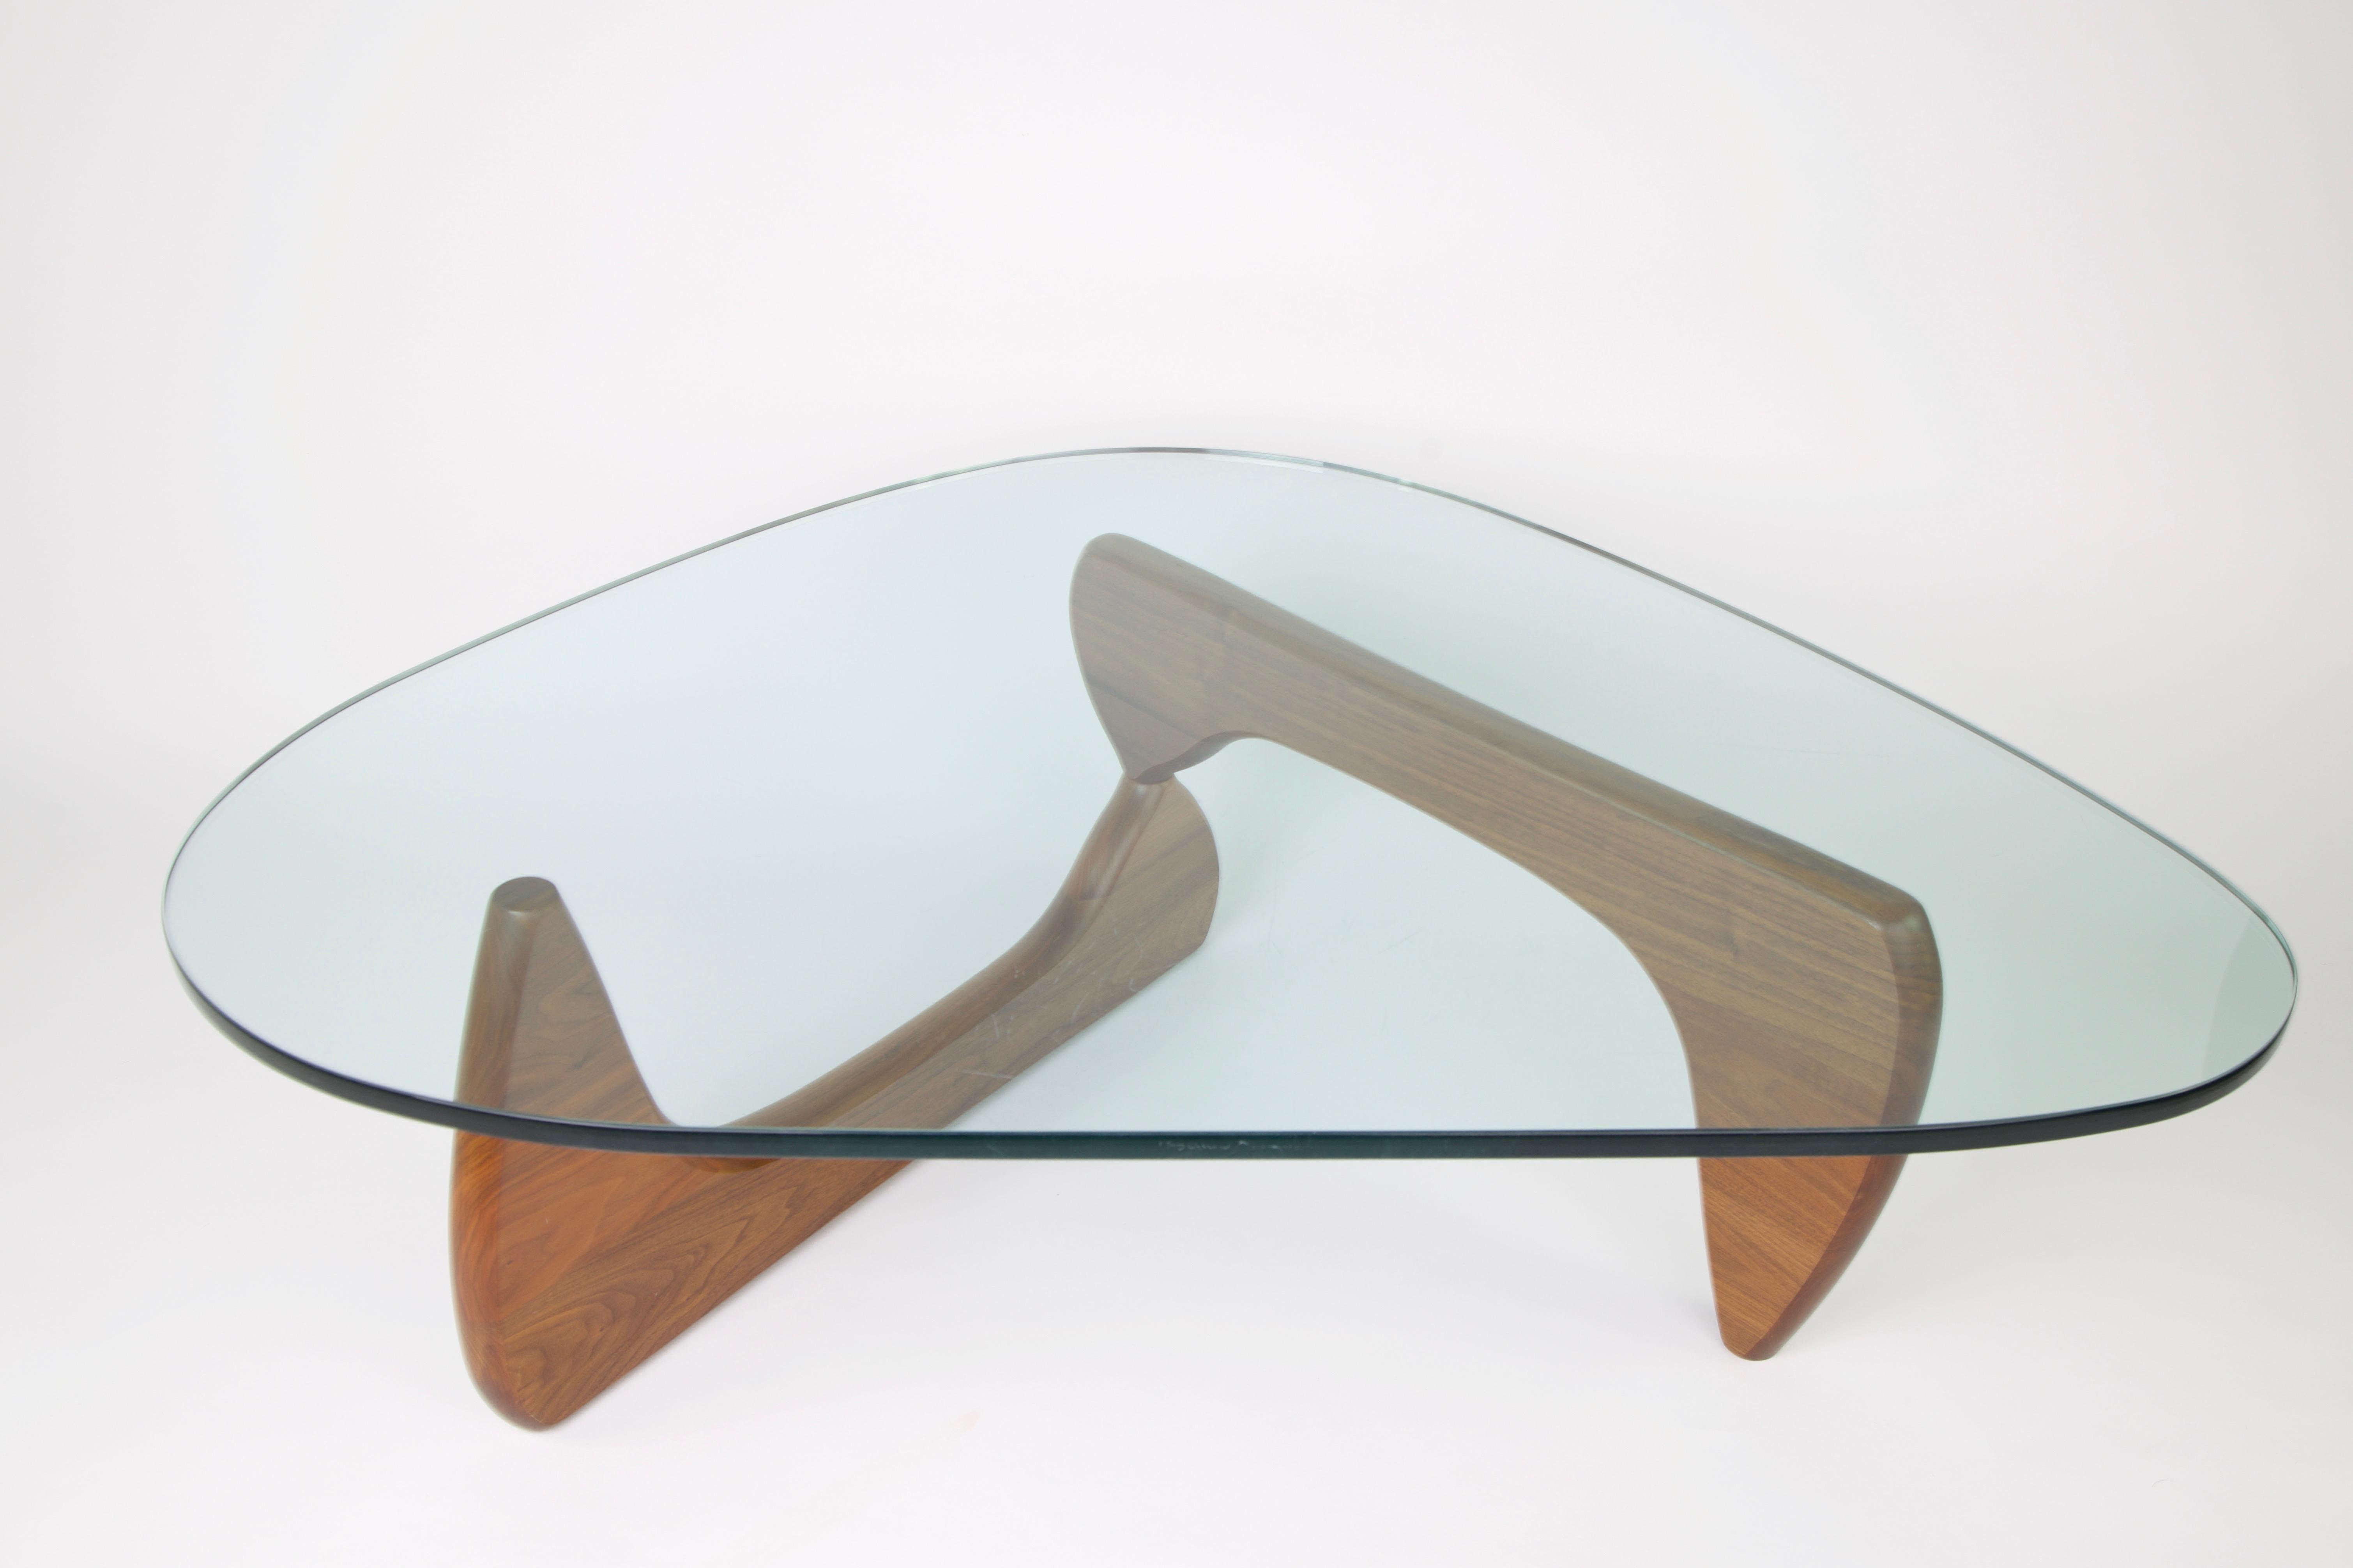 The glass has Isamu Noguchi's signature and the base has a Herman Miller tag.

The Noguchi table is a piece of modernist furniture first produced in the mid-20th century. Introduced by Herman Miller in 1947, it was designed in the United States by